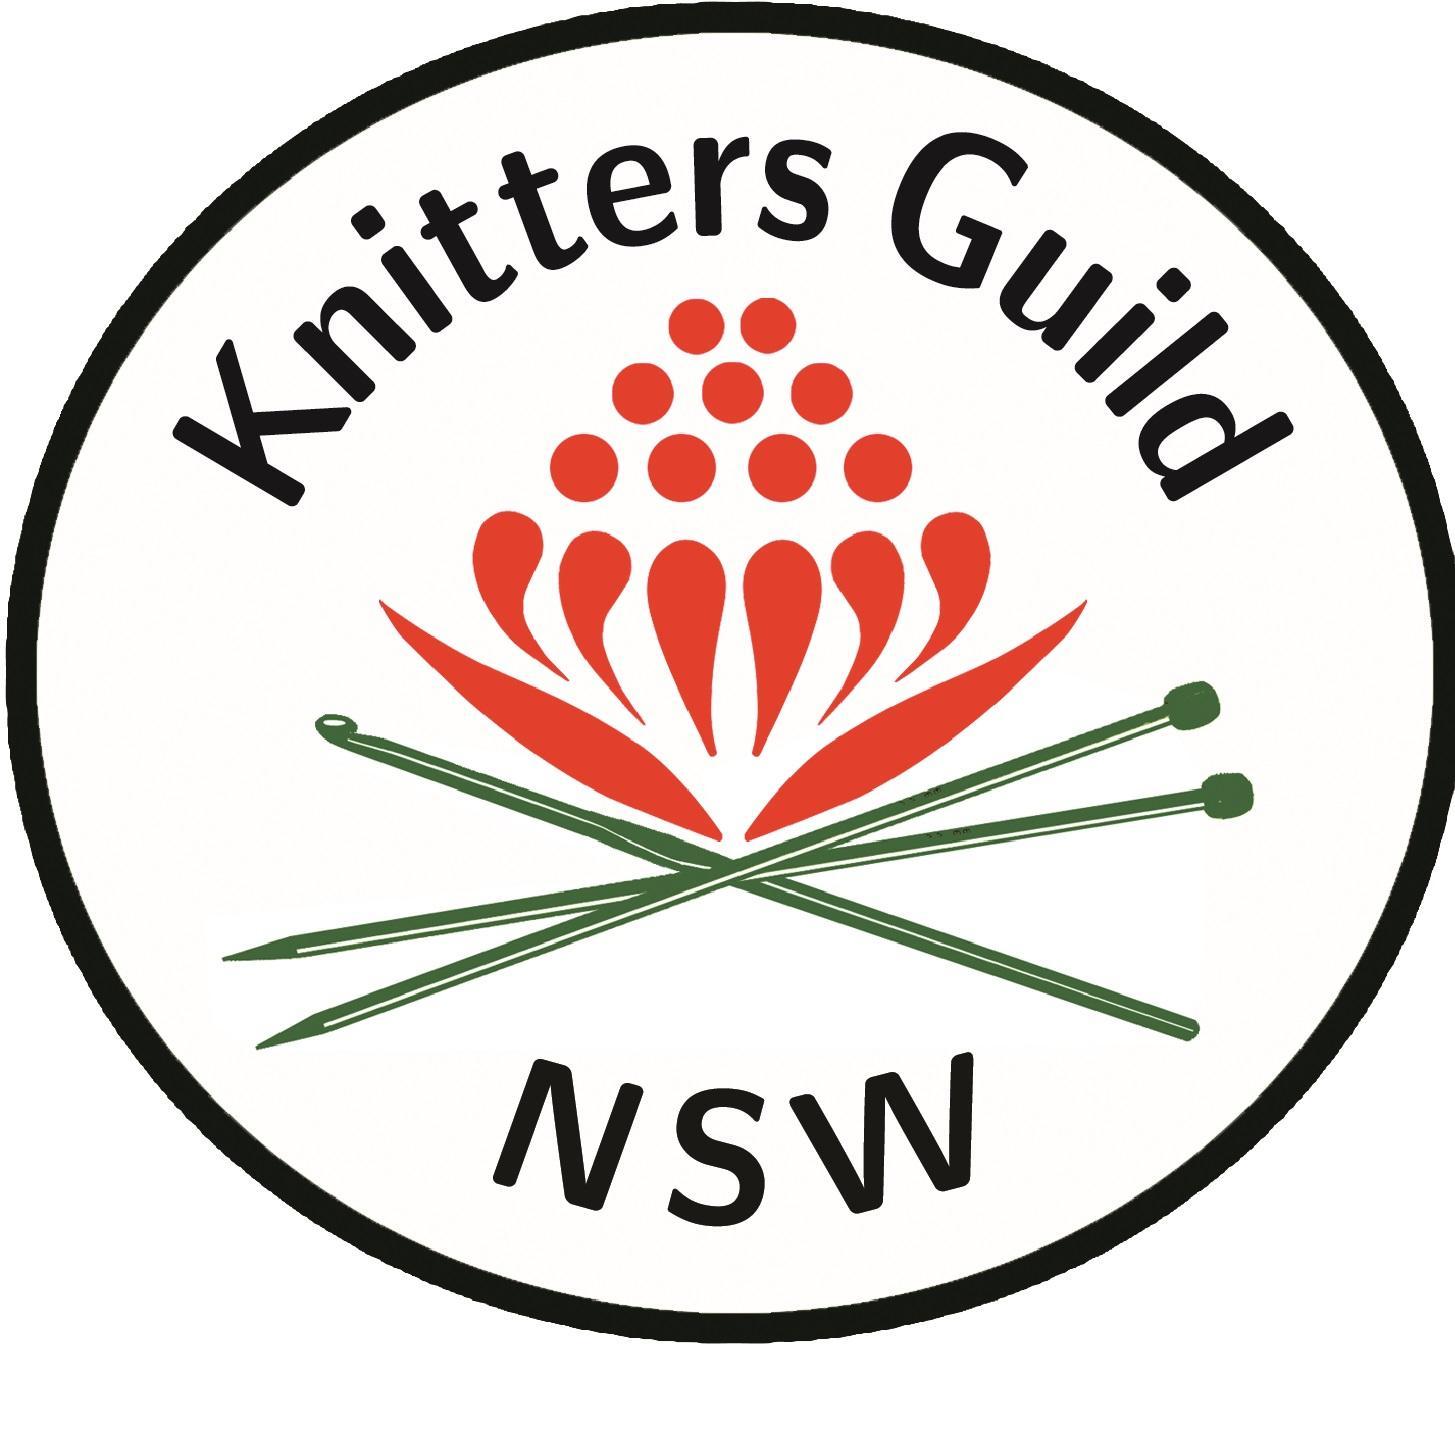 The official Twitter account of NSW Knitters Guild Inc